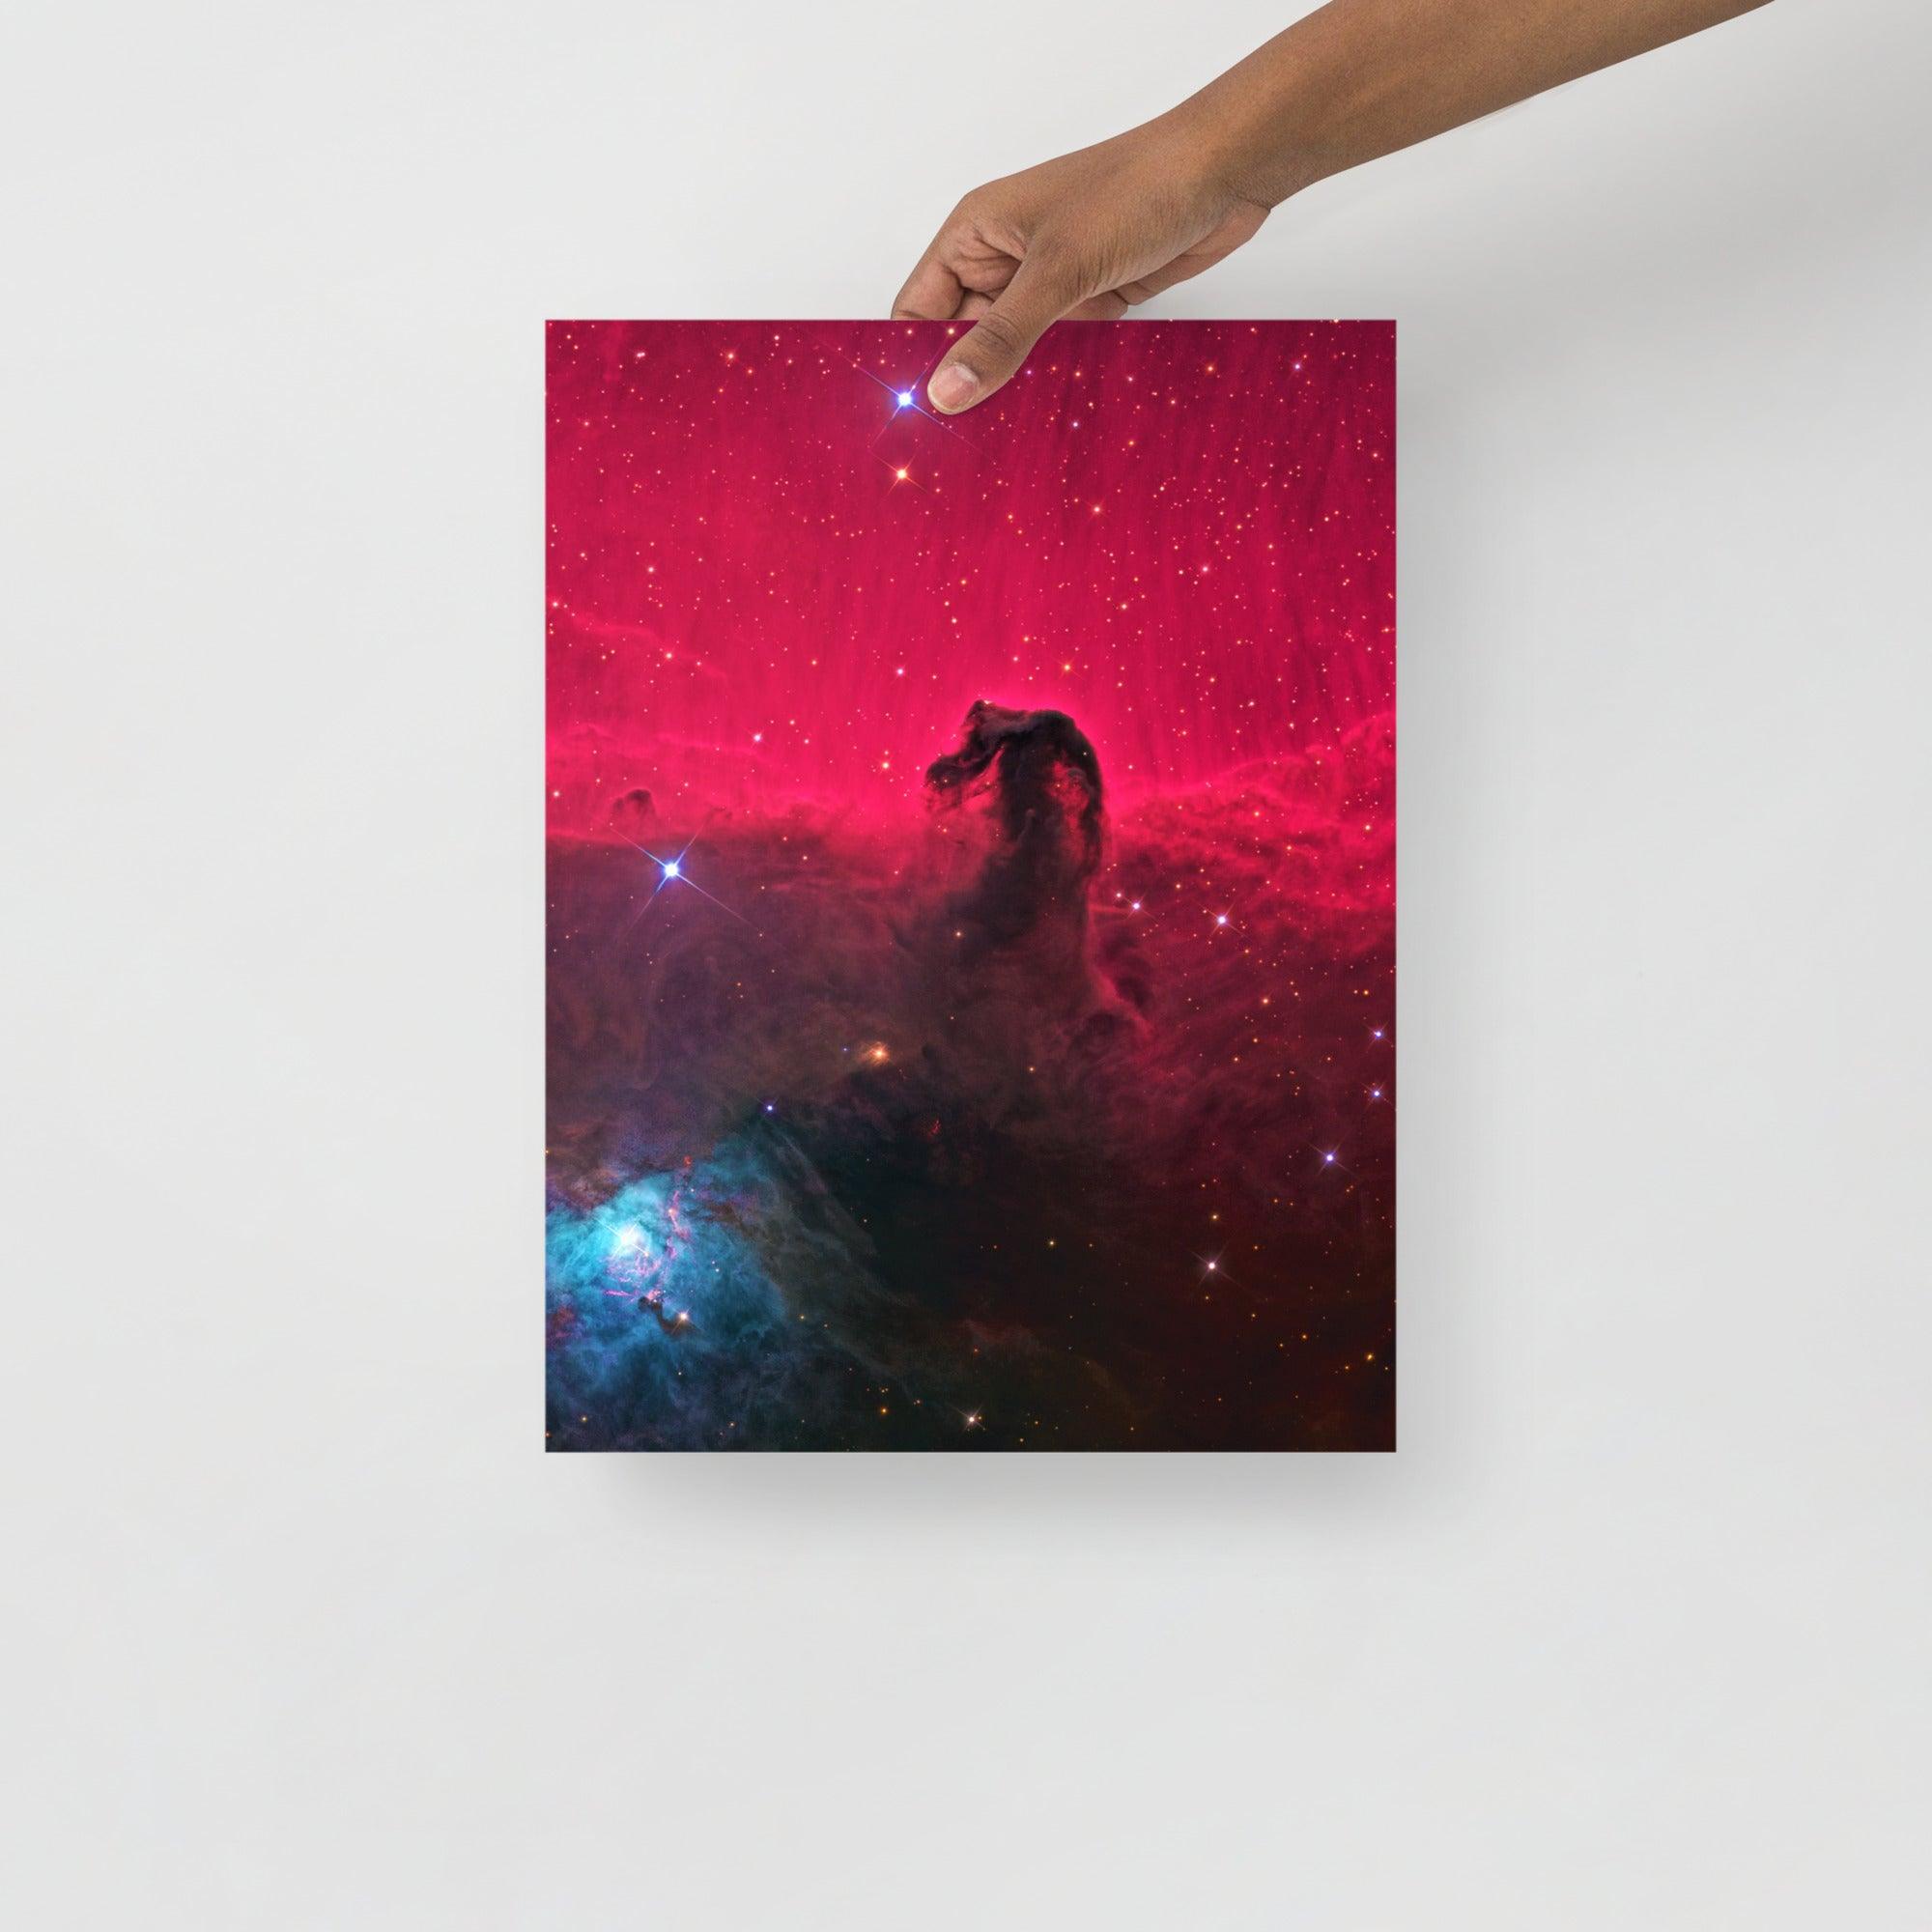 A Horsehead Nebula poster on a plain backdrop in size 12x16”.